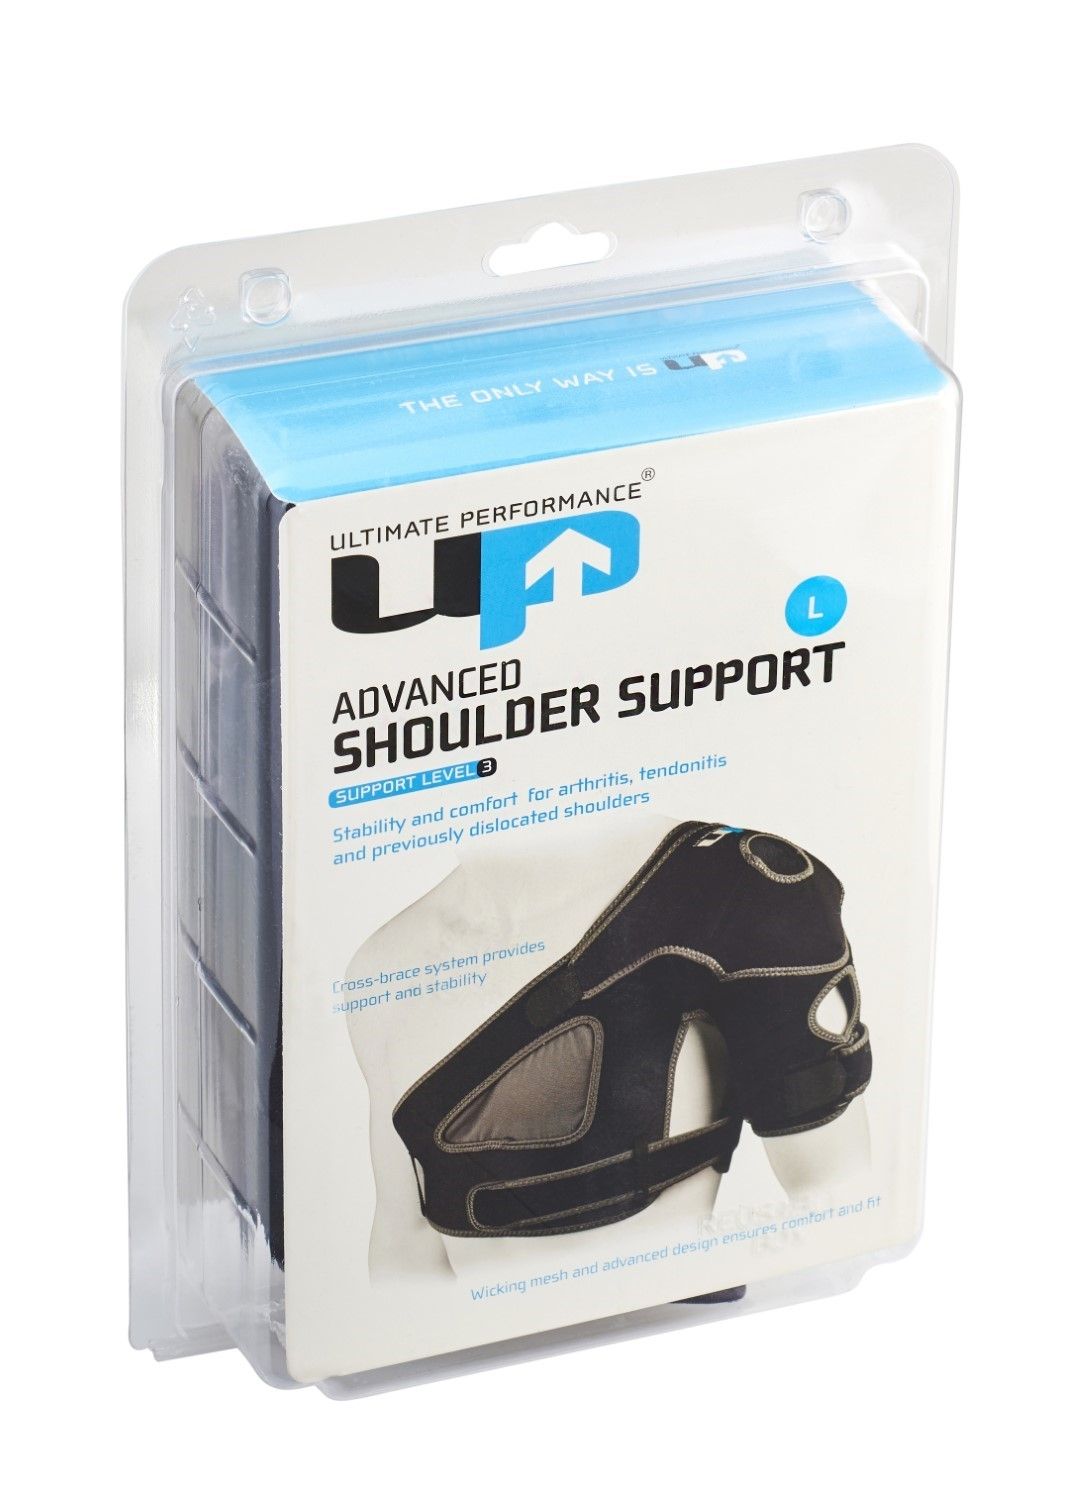 ULTIMATE PERFORMANCE ADVANCED SHOULDER SUPPORT photo